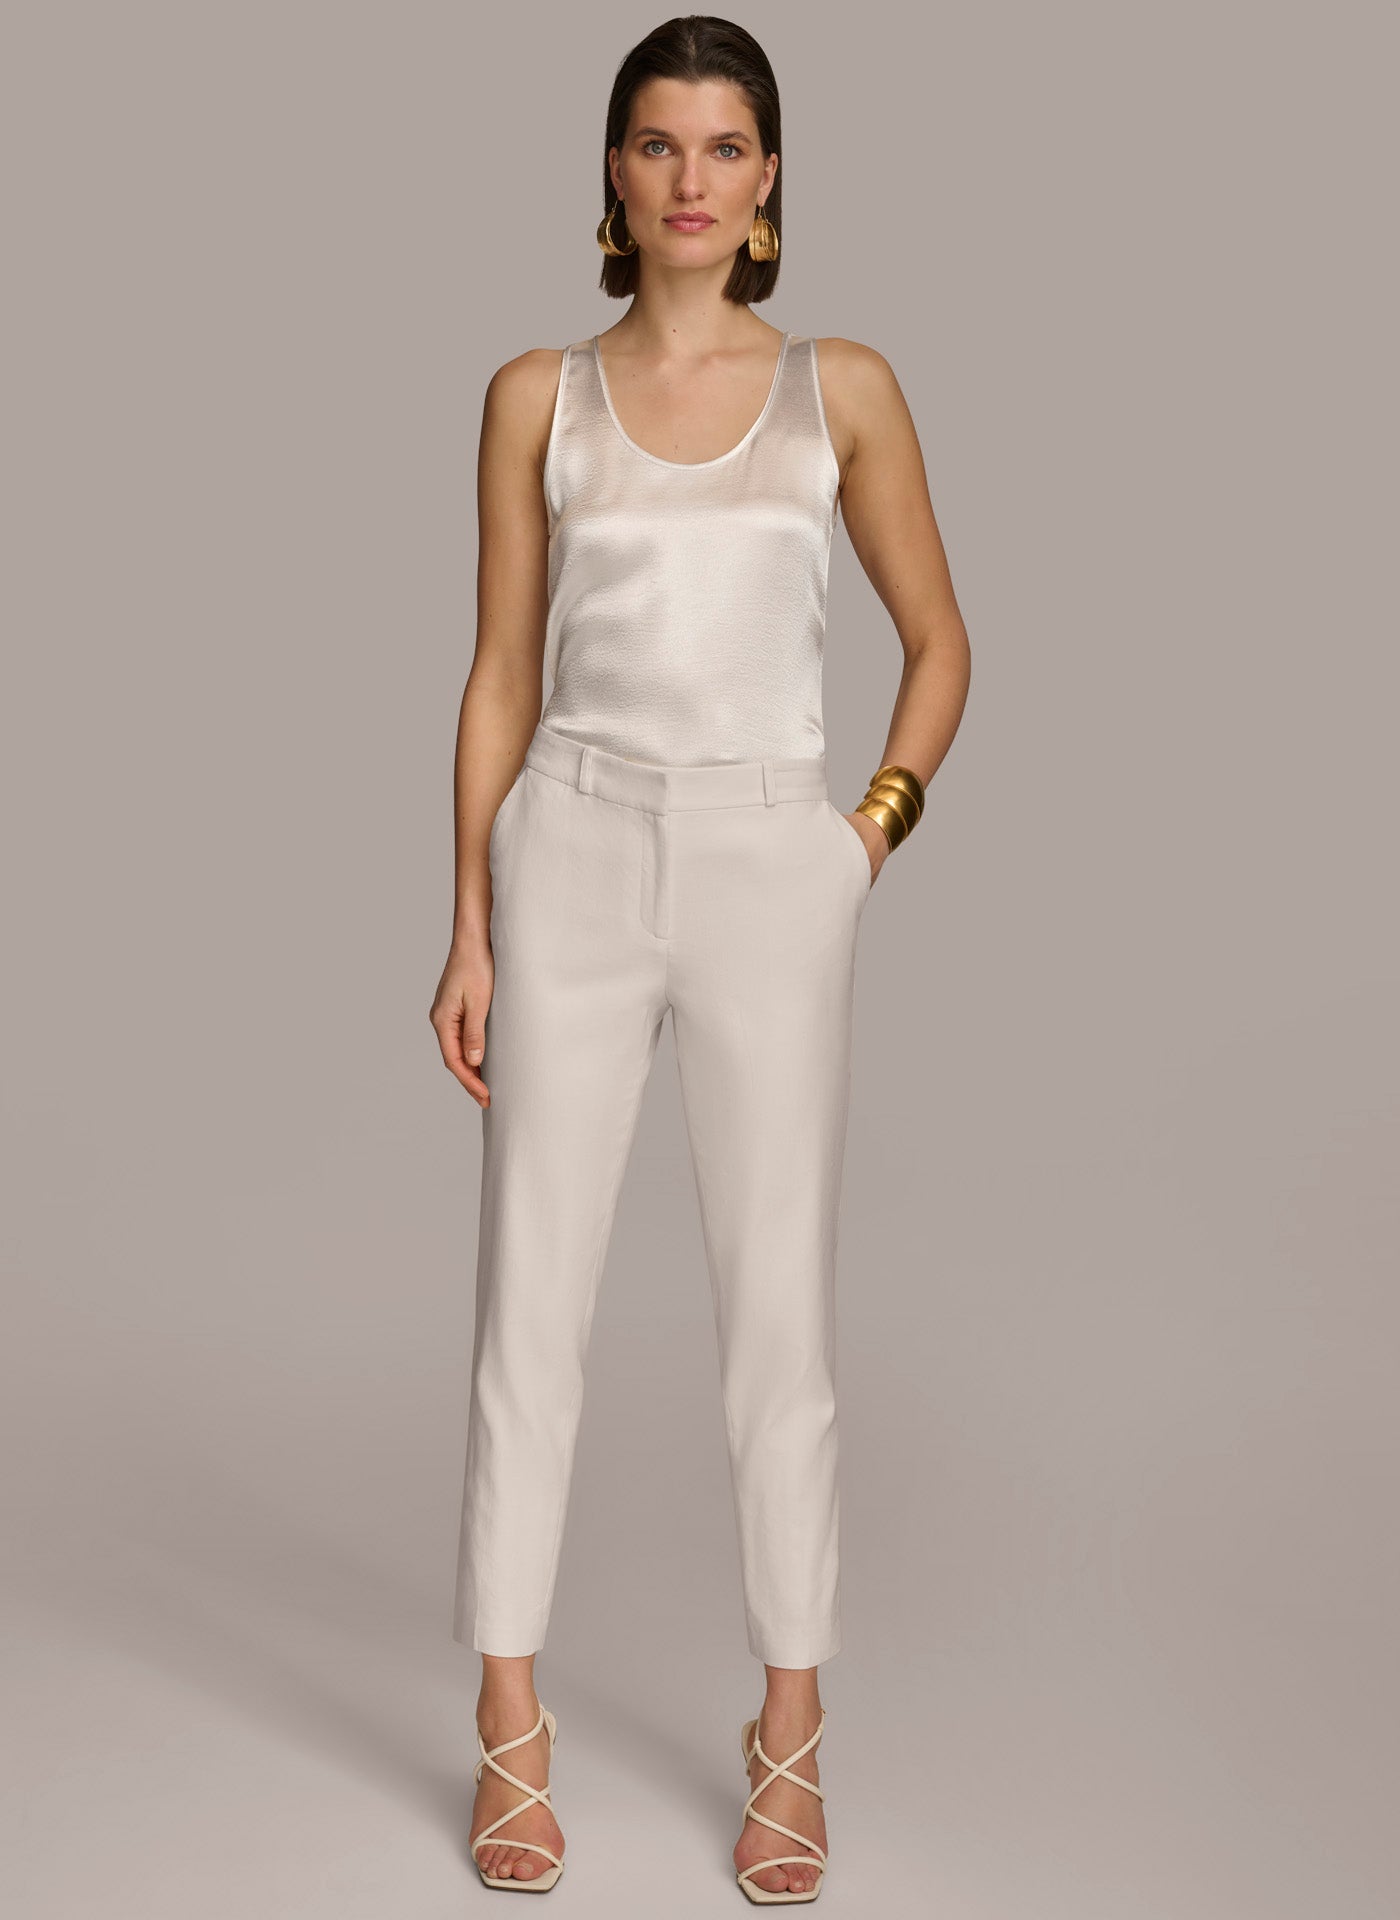 FLAT FRONT STRAIGHT PANT